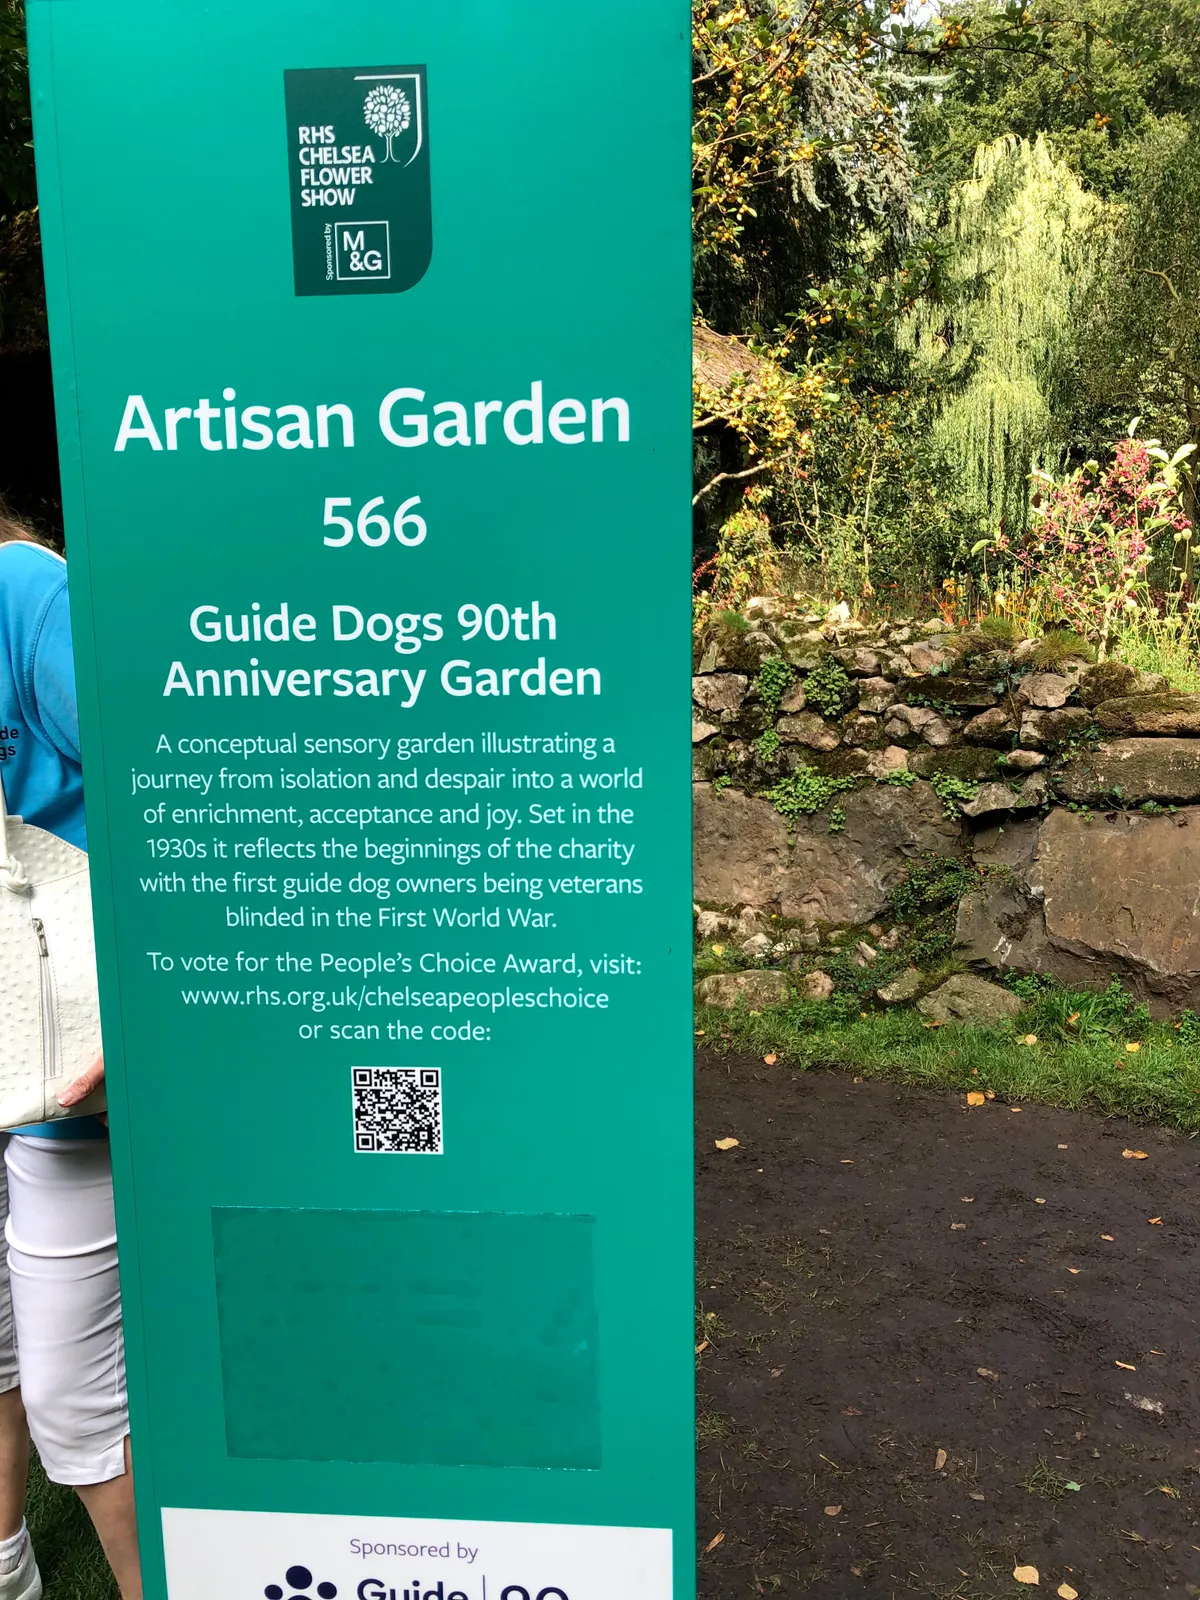 The Guide Dogs 50th Anniversary Garden at Chelsea 2021